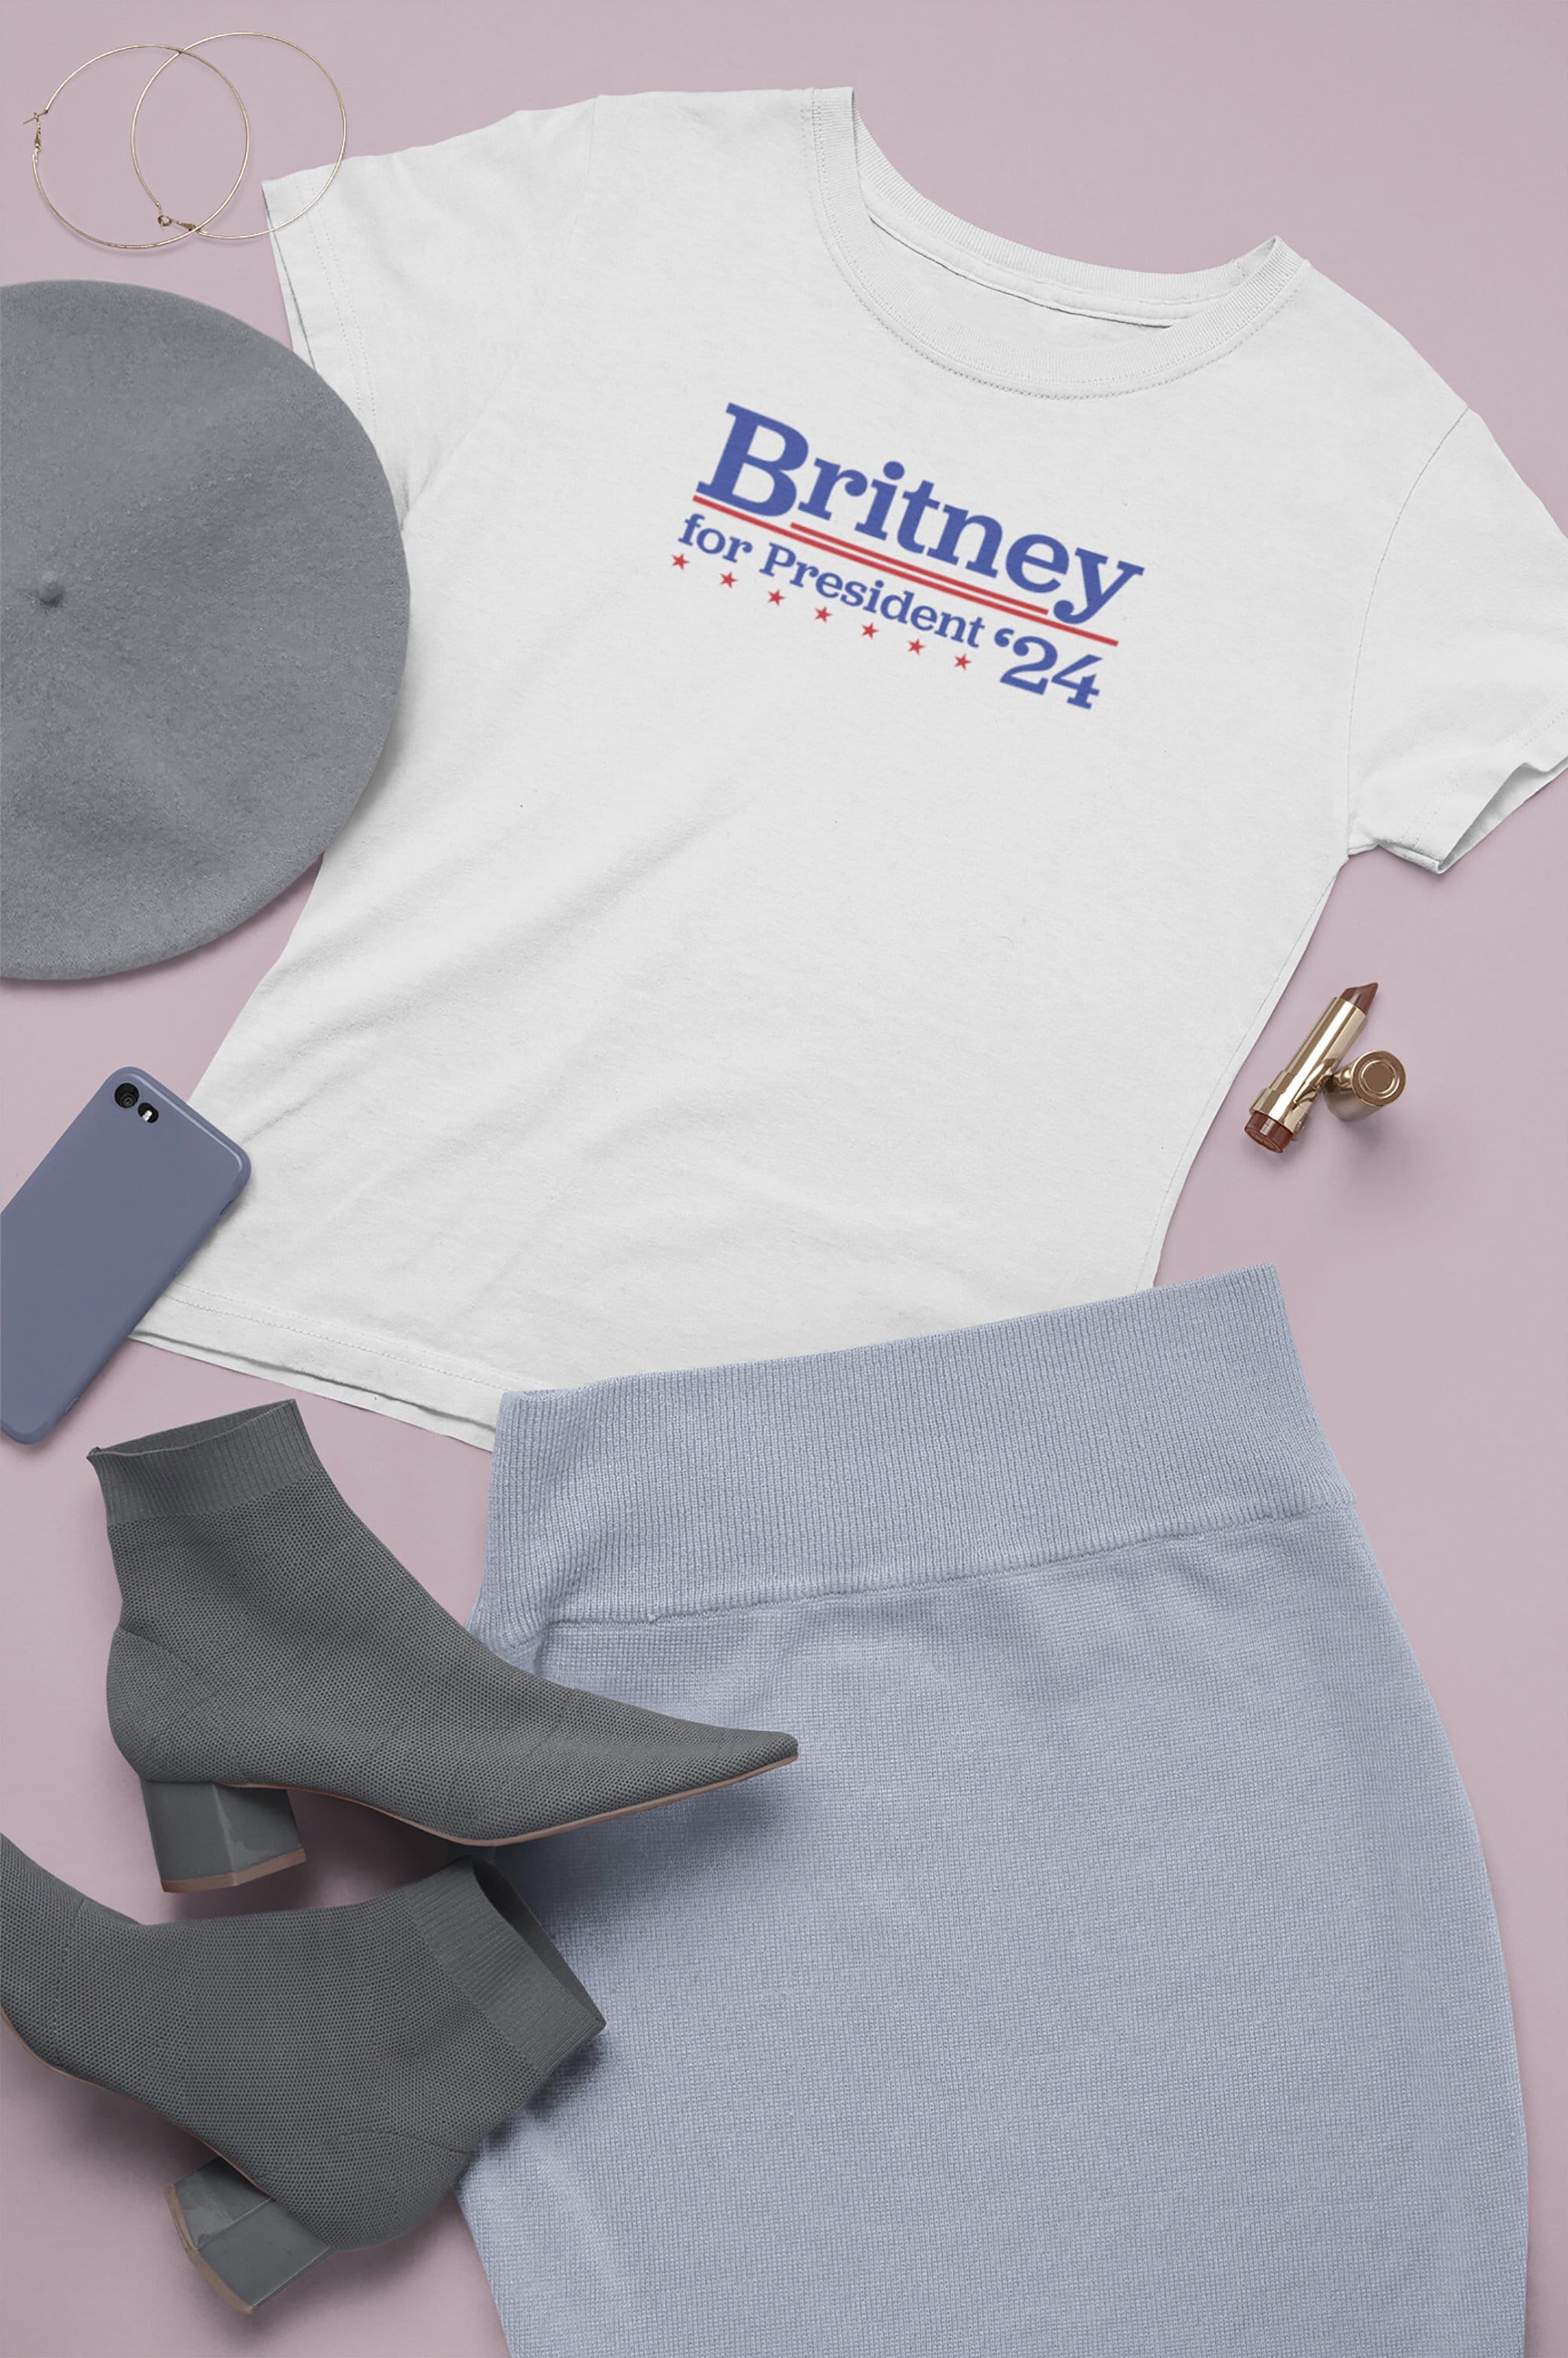 Discover Britney for President T-Shirt | Britney Spears Election Shirt | Britney 2024 Presidential Campaign Graphic Tee | Britney Fan Gift Shirt